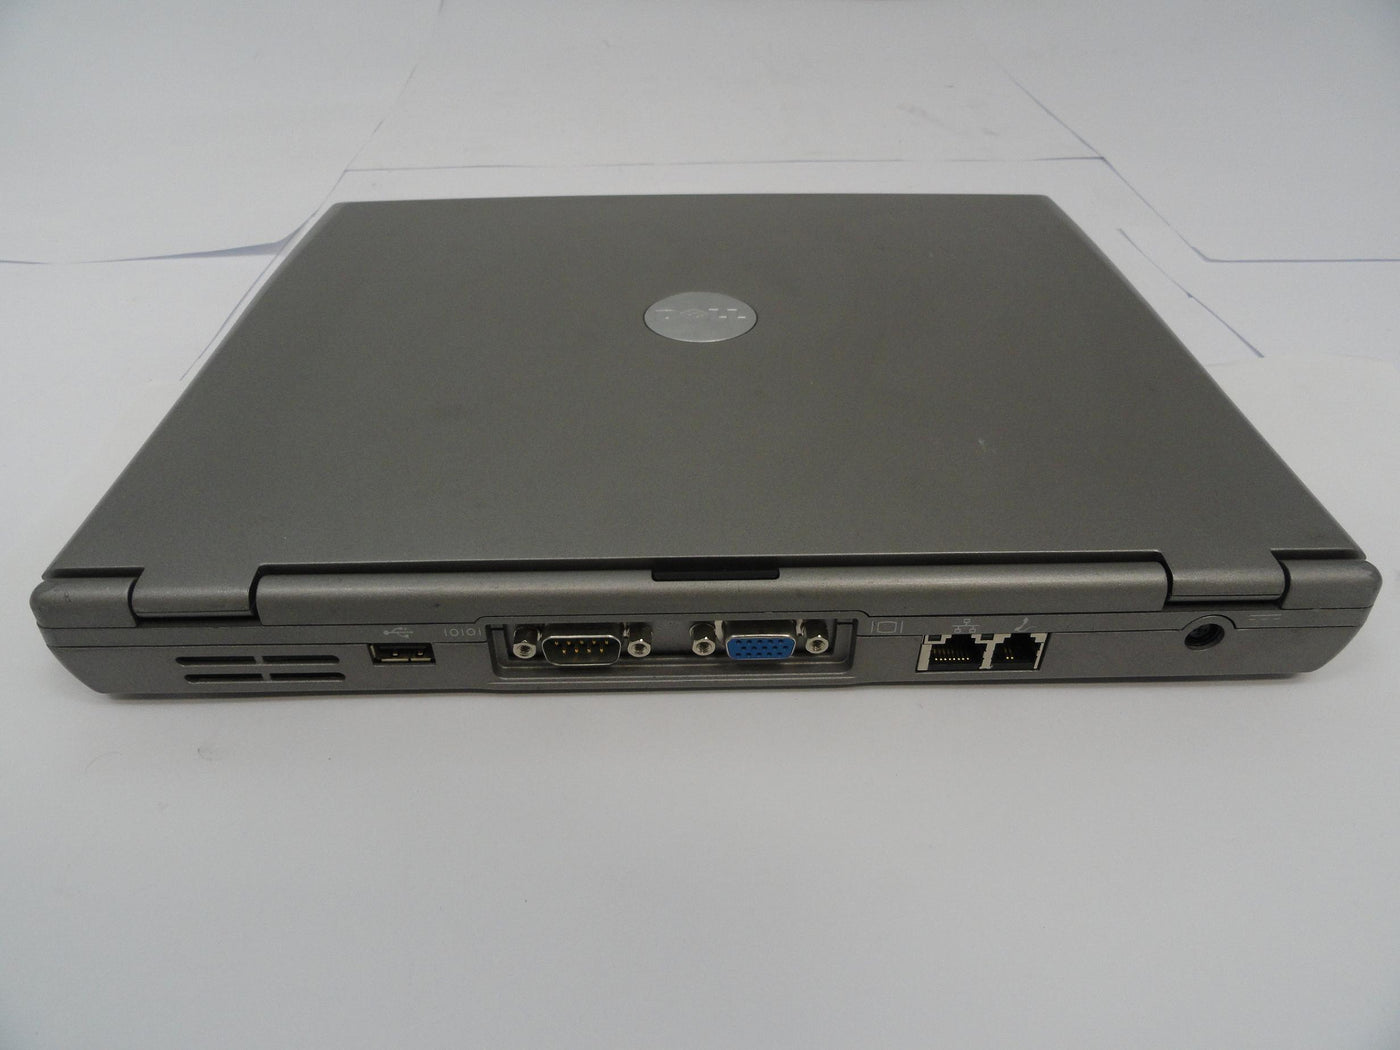 PR15935_PPT_Dell Latitude D400 1.4GHz CPU 512Mb RAM No HDD - Image3